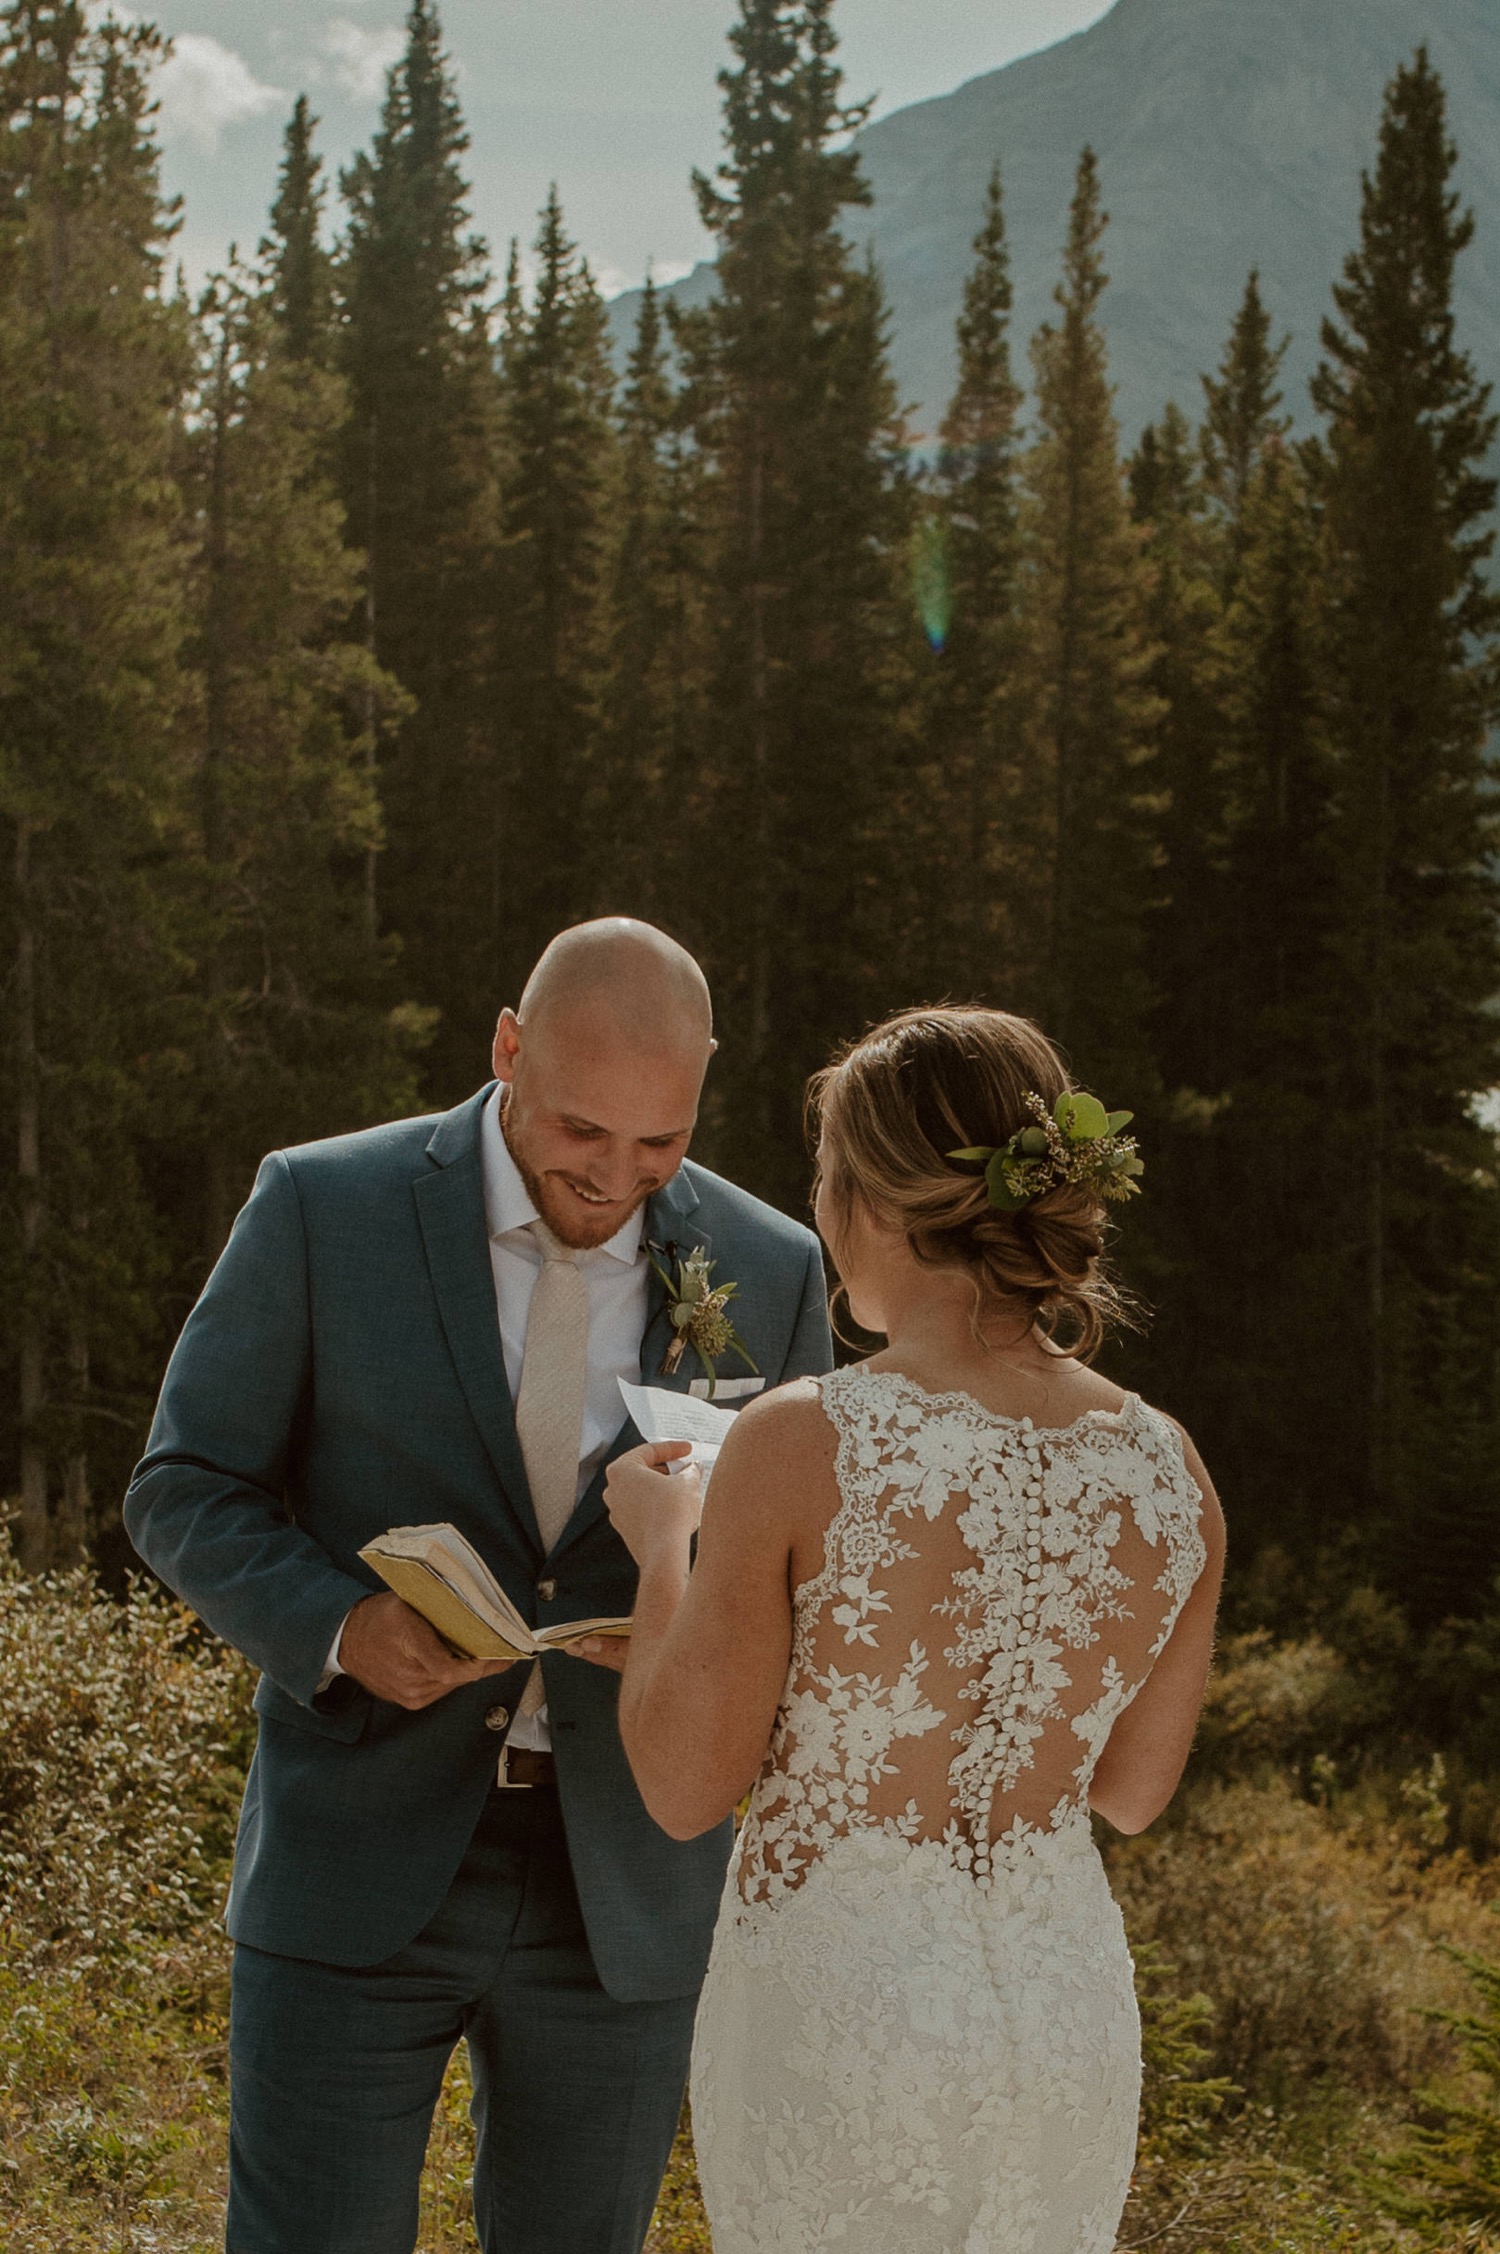 The bride and groom read private letters they wrote to each other before their elopement ceremony with family and friends in Kananaskis Alberta